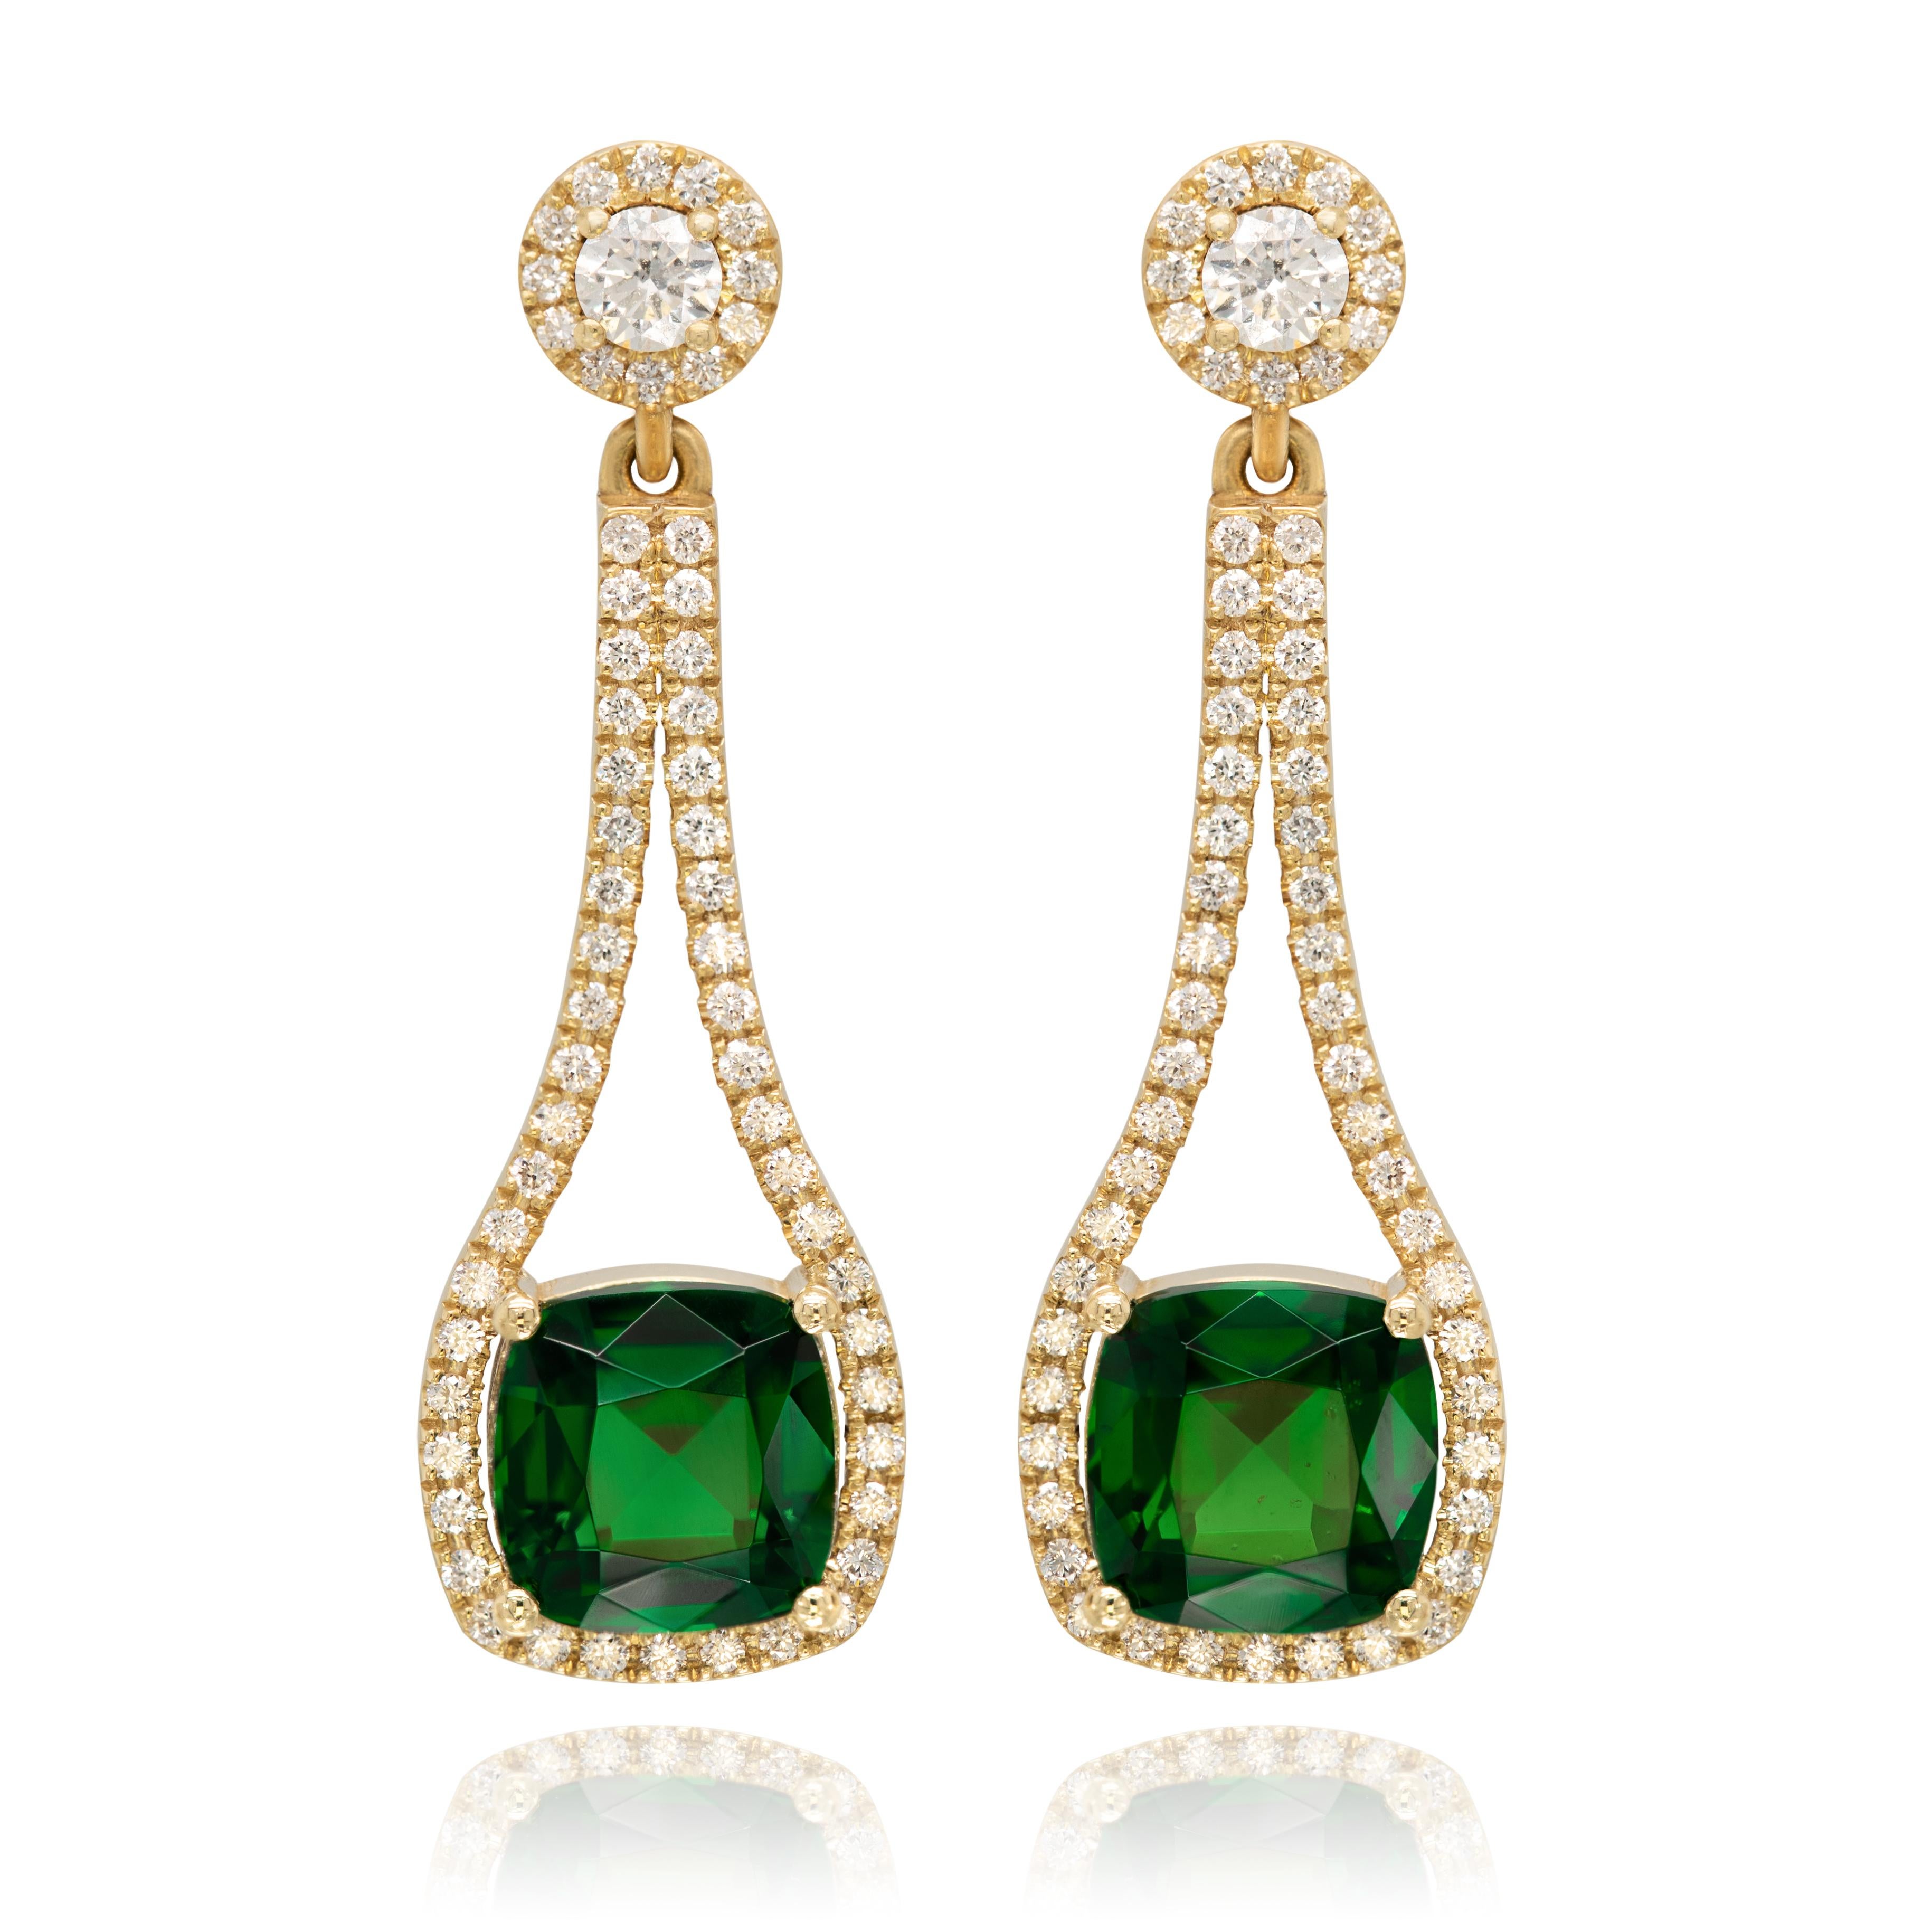 Natural Tourmalines 4.57 Carats set in 18K Yellow Gold Earrings with Diamonds For Sale 1